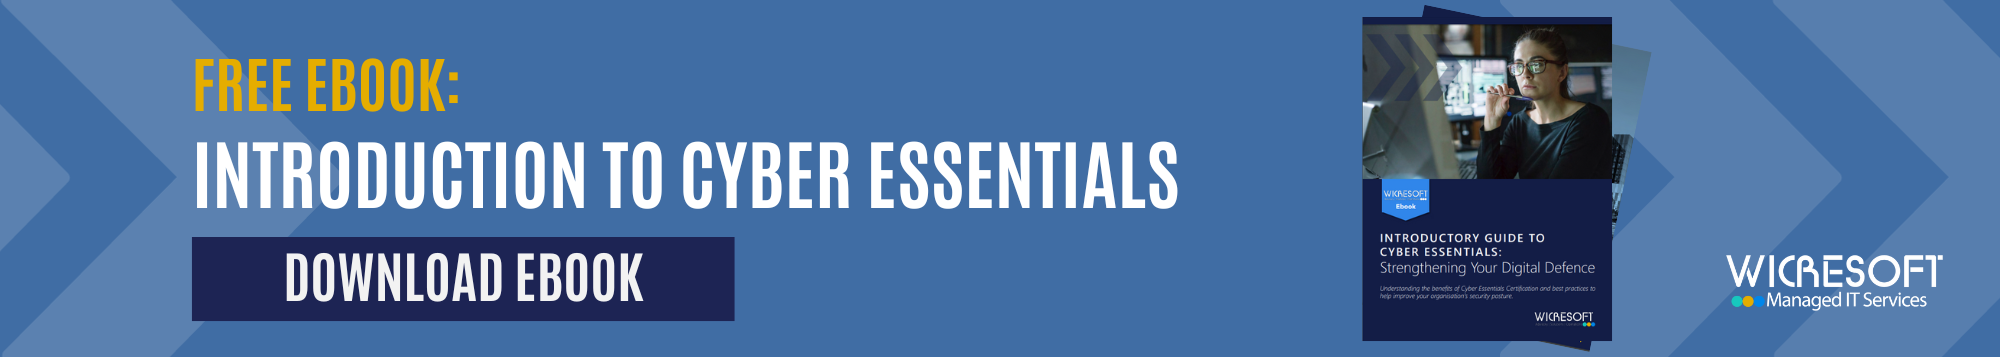 Download our Free Cyber Essentials Ebook 